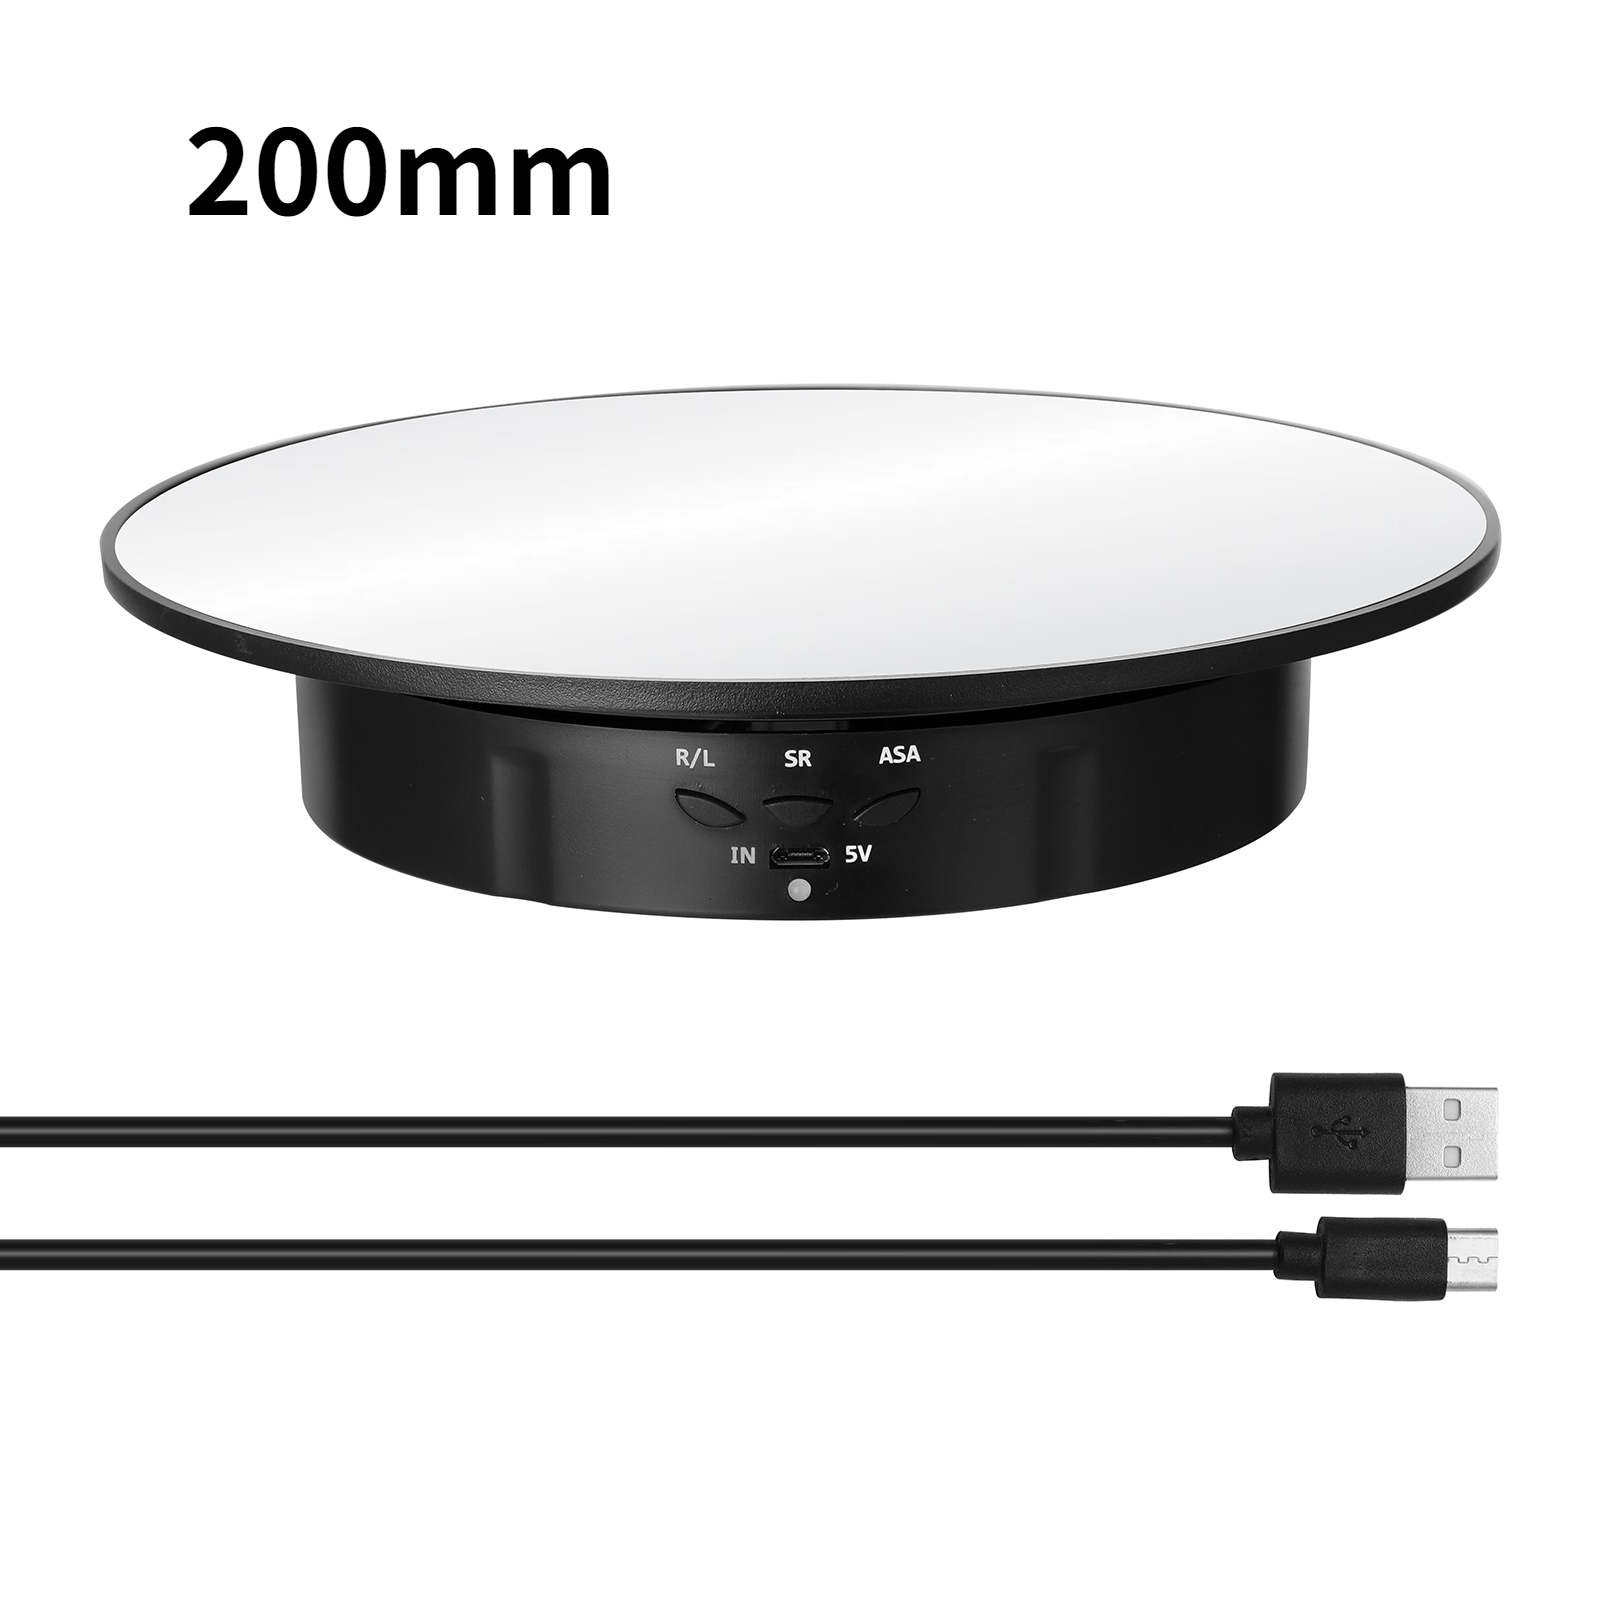 Big Deal 360 Degree Motorized Rotating Mirrored Display Stand